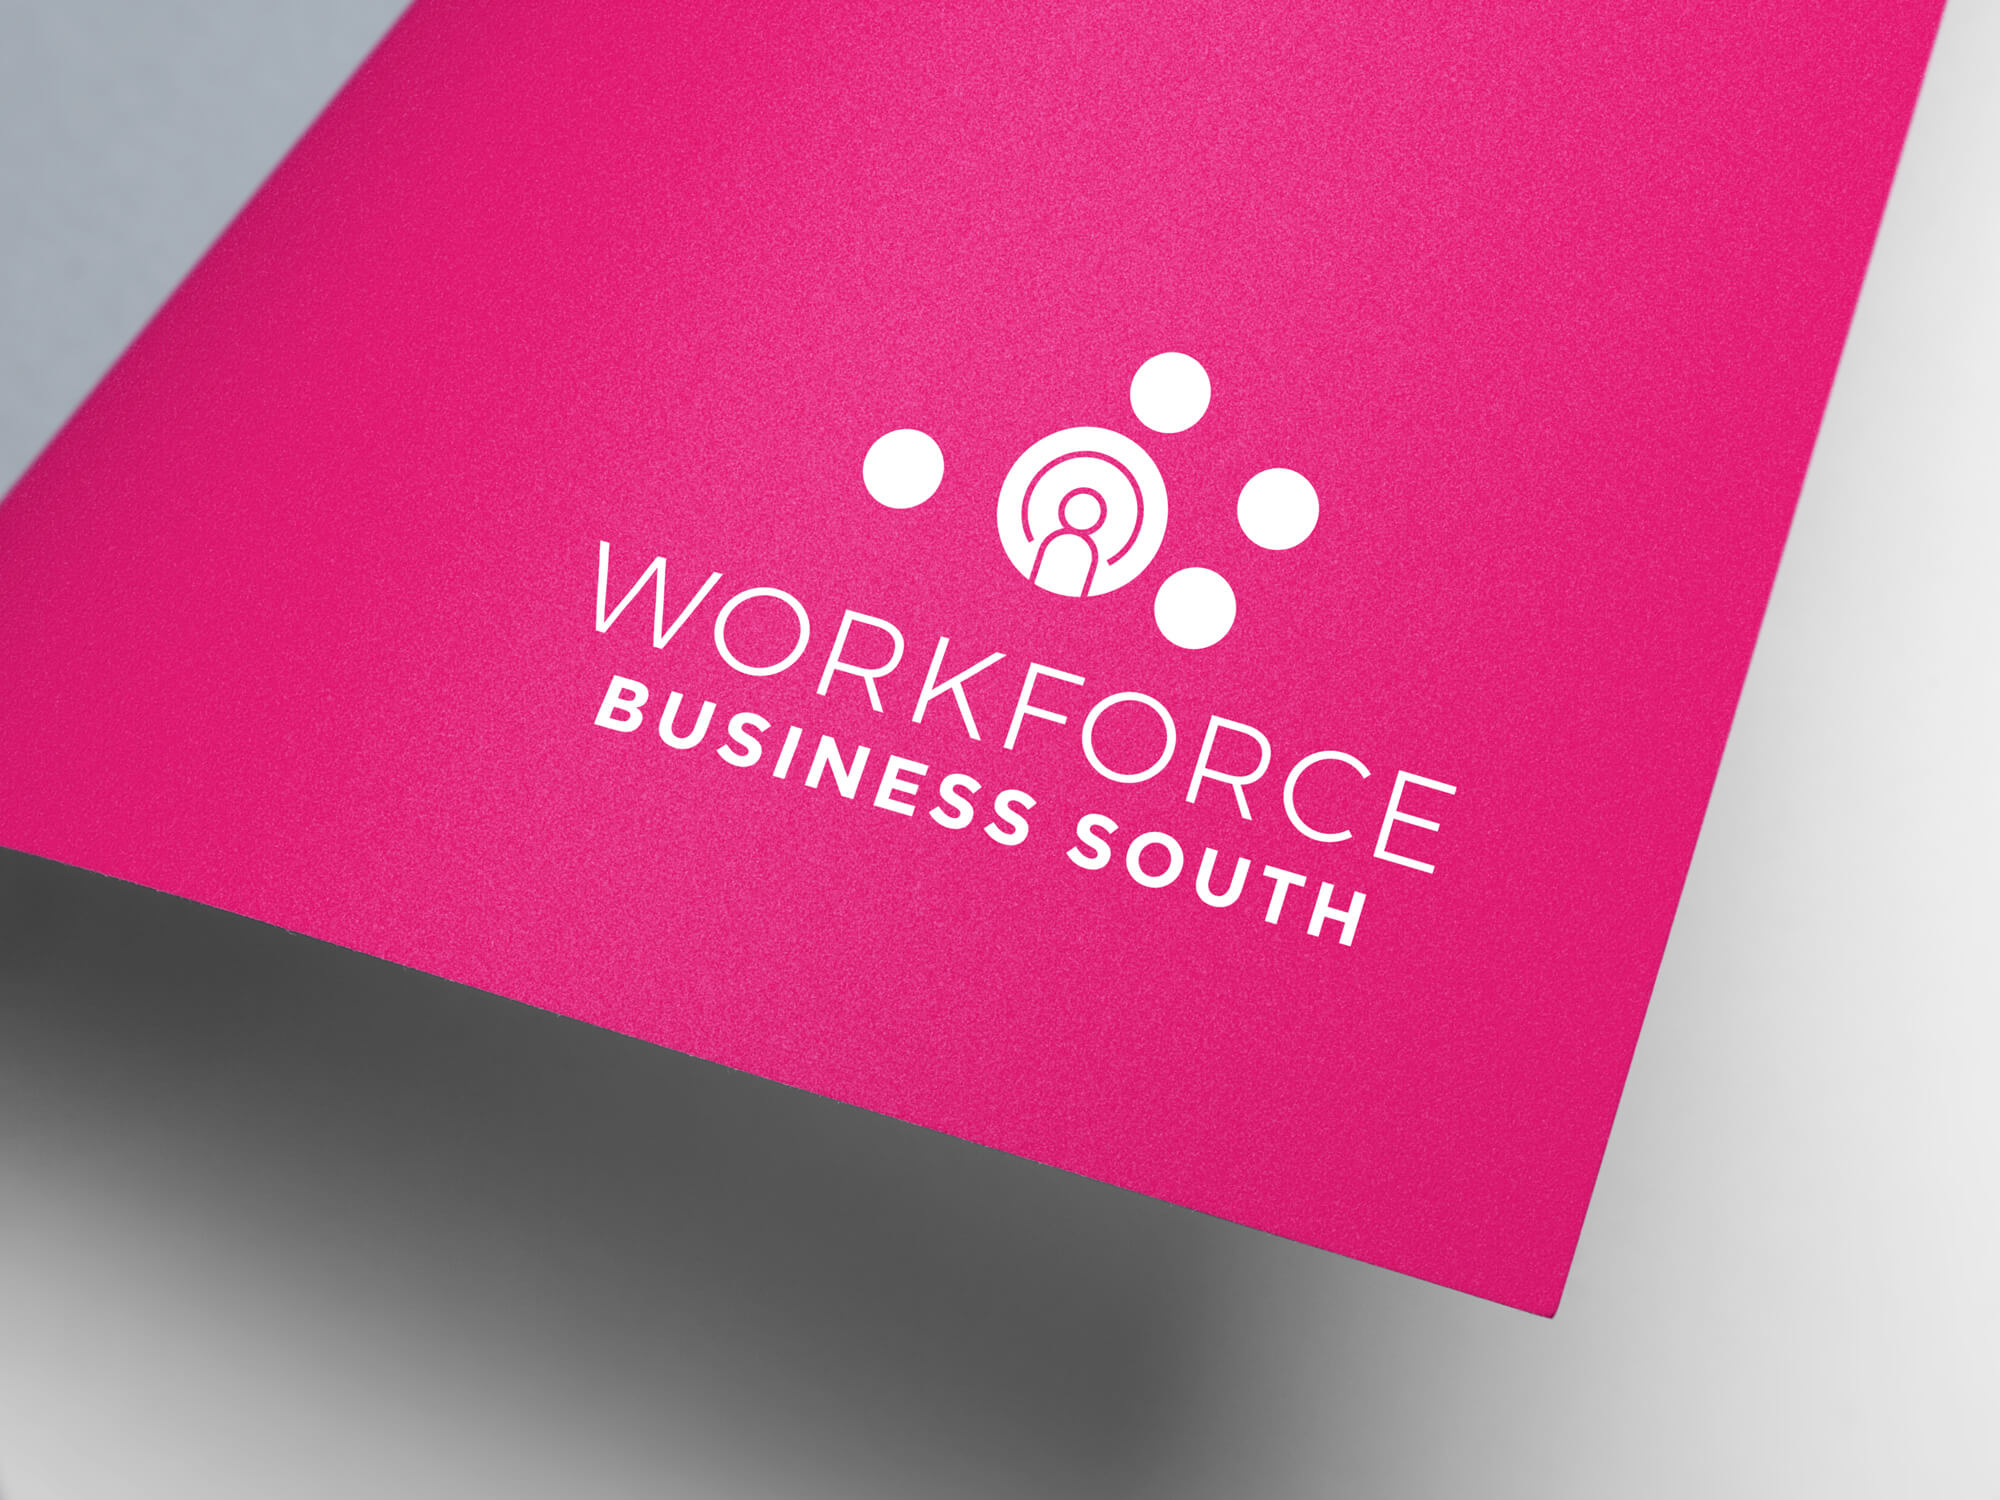 Business South Action Group